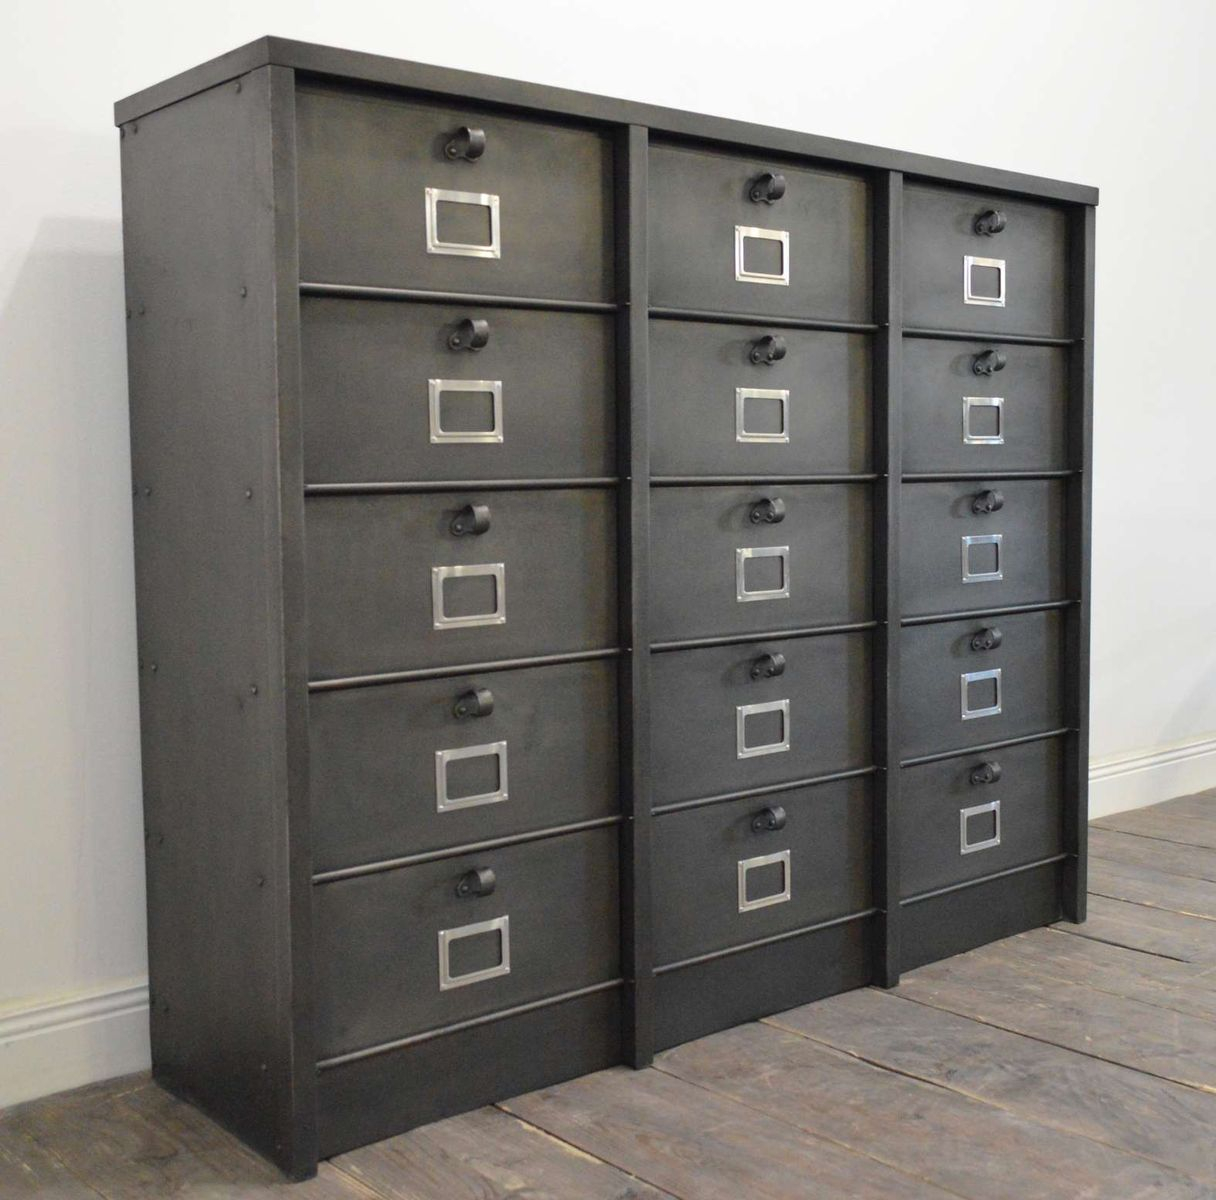 Large Filing Cabinets Large Filing Cabinets pertaining to dimensions 1216 X 1200